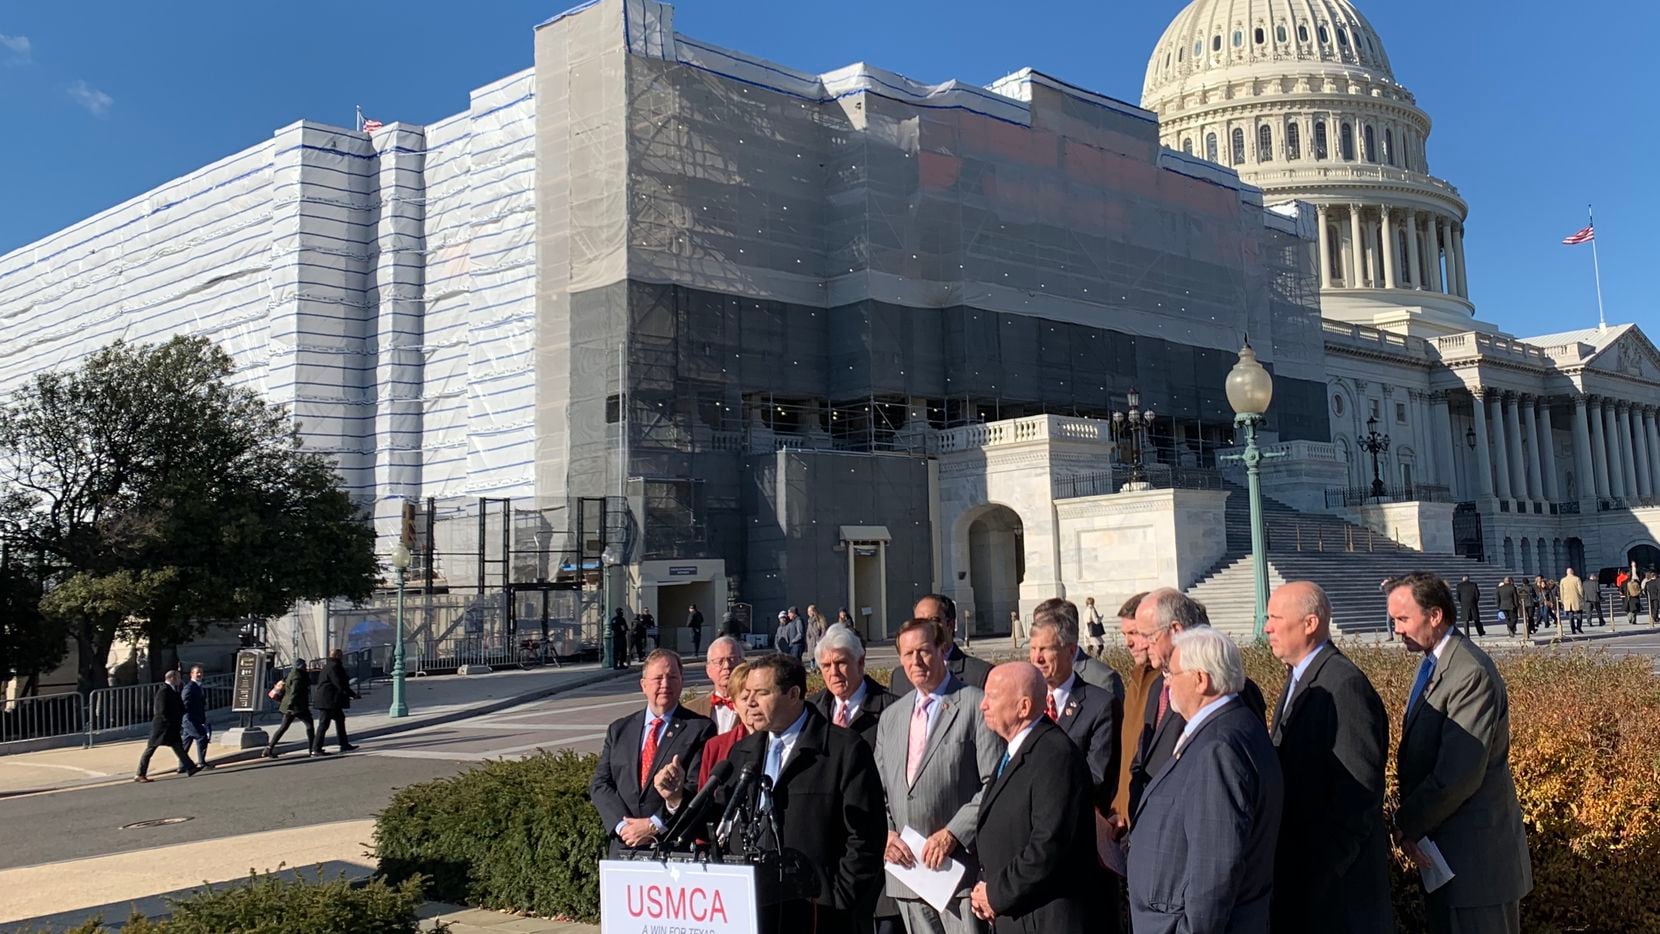 Seventeen members of Congress from Texas take part in a news conference to urge speedy ratification of the United States-Mexico-Canada Agreement in front of the U.S. Capitol on Dec. 5, 2019.